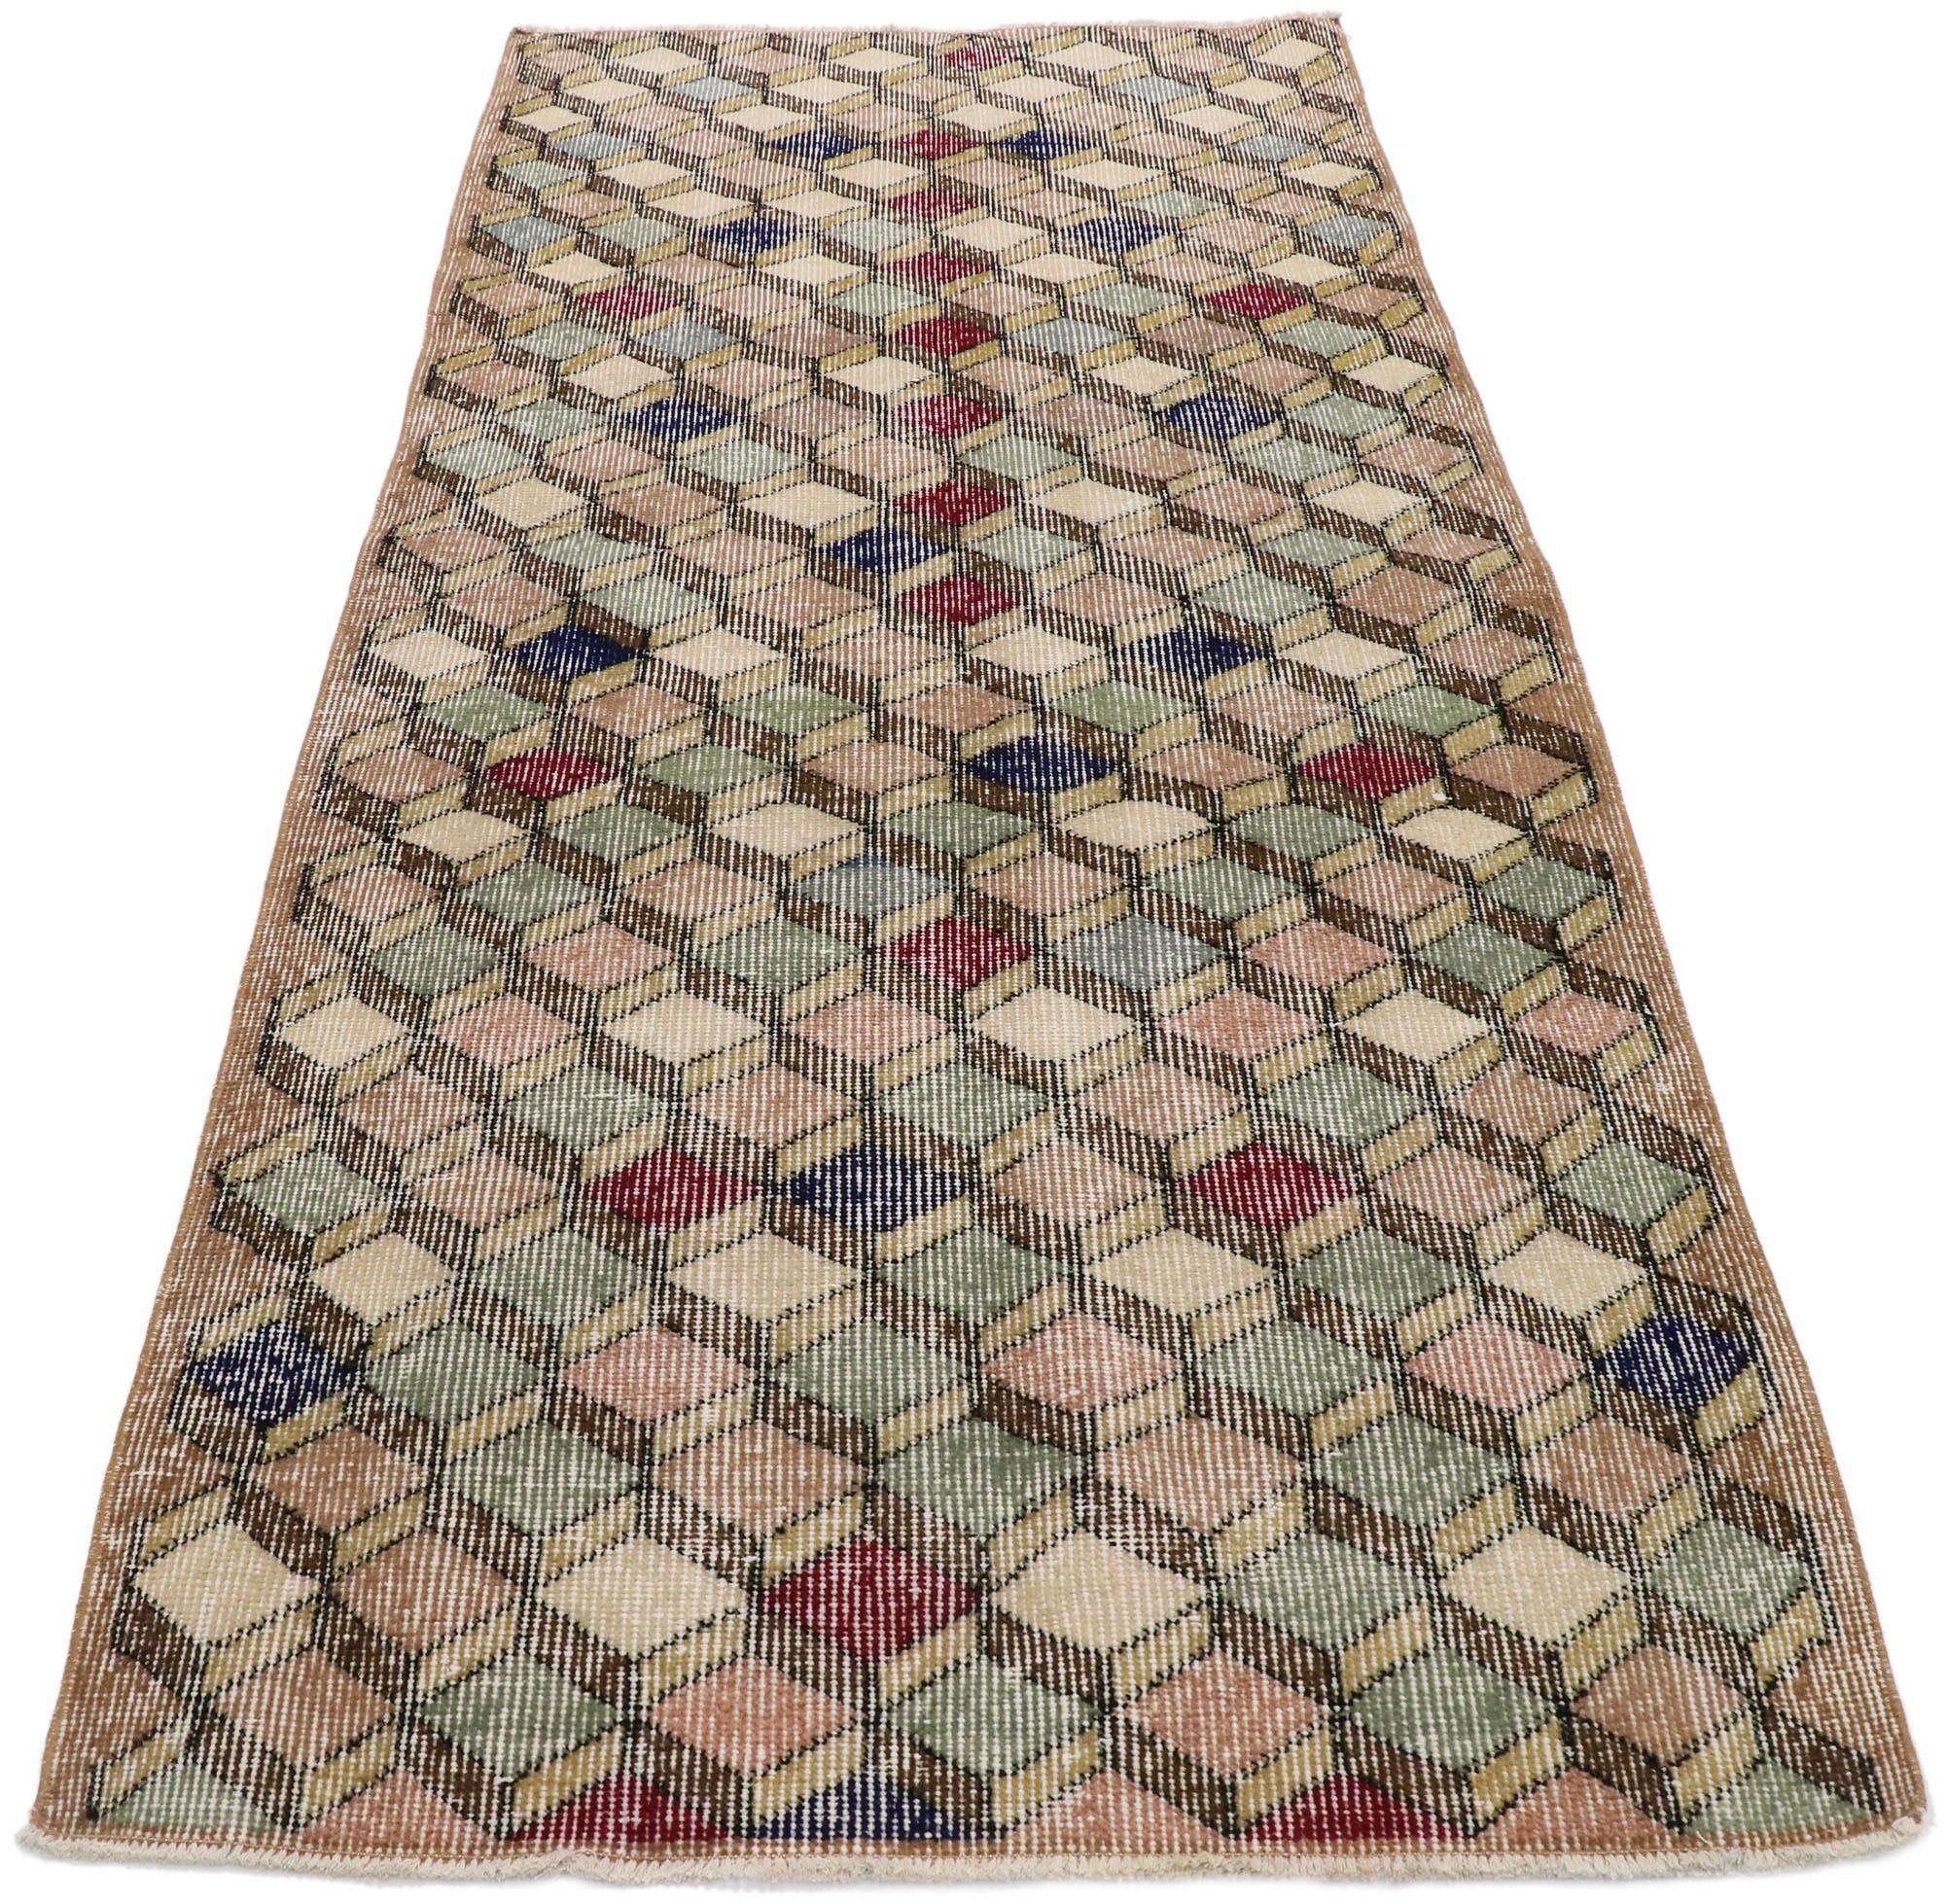 Distressed Vintage Turkish Sivas Rug with Rustic Mid-Century Modern Style In Distressed Condition For Sale In Dallas, TX